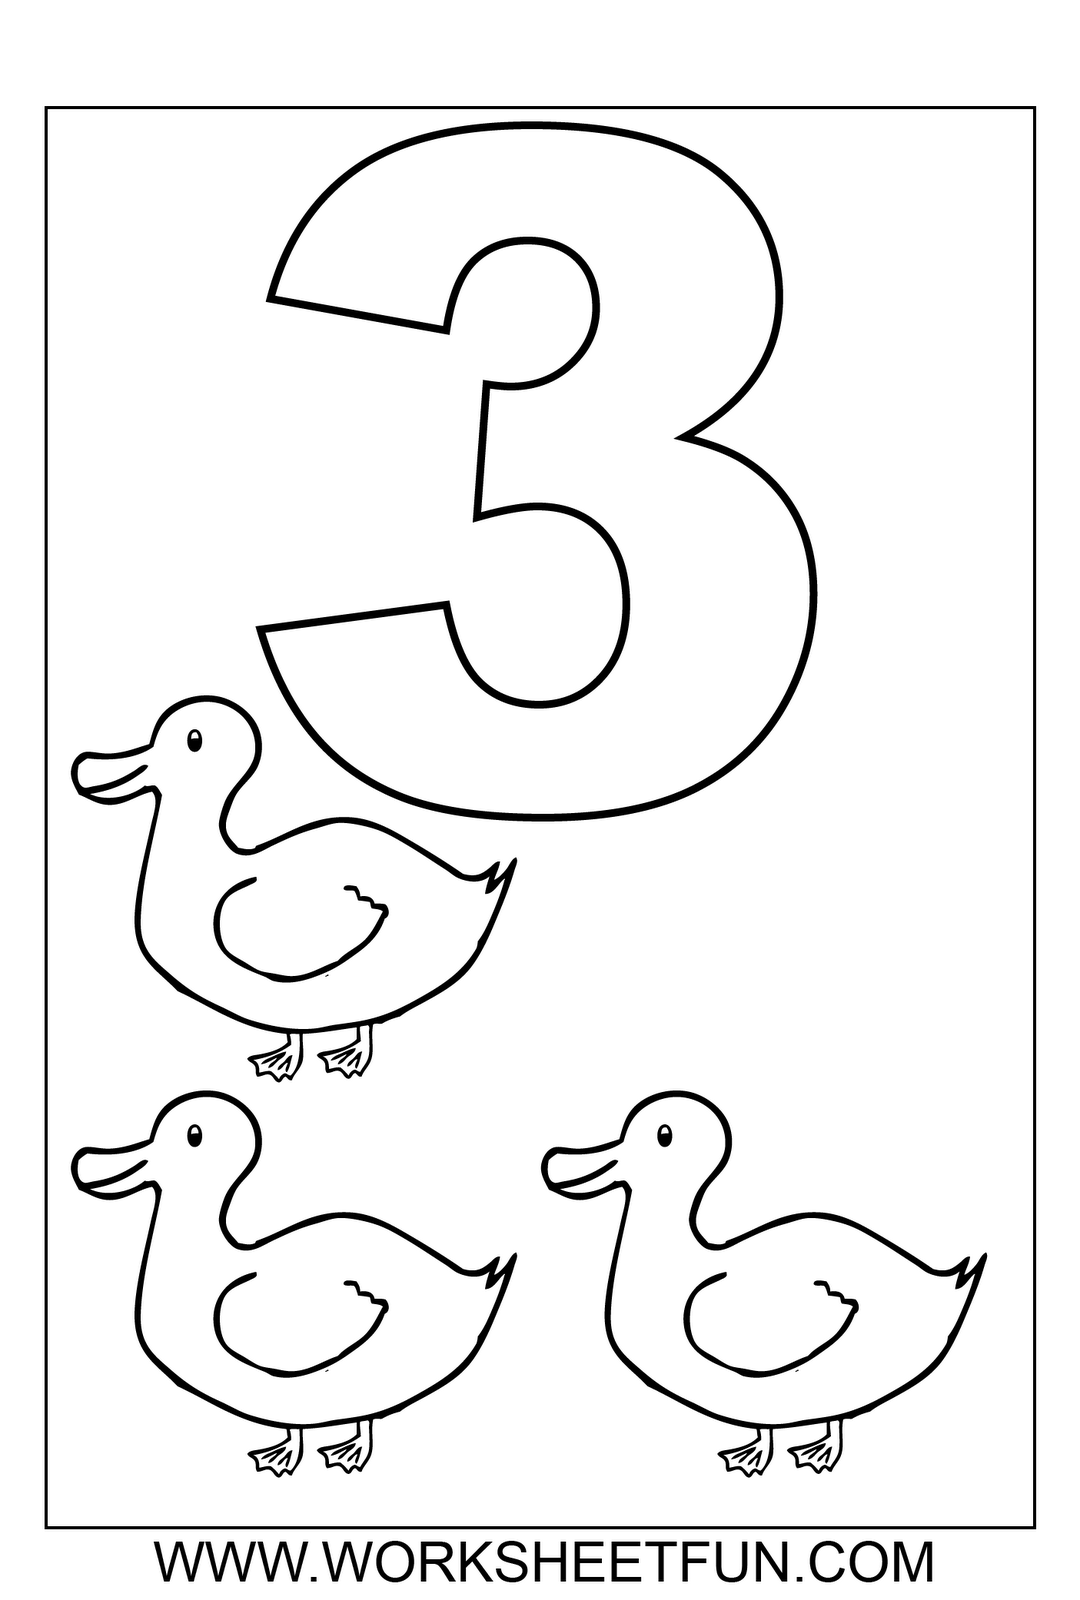 coloring pages for two year olds image detail for coloring worksheets for preschool and coloring year two pages for olds 